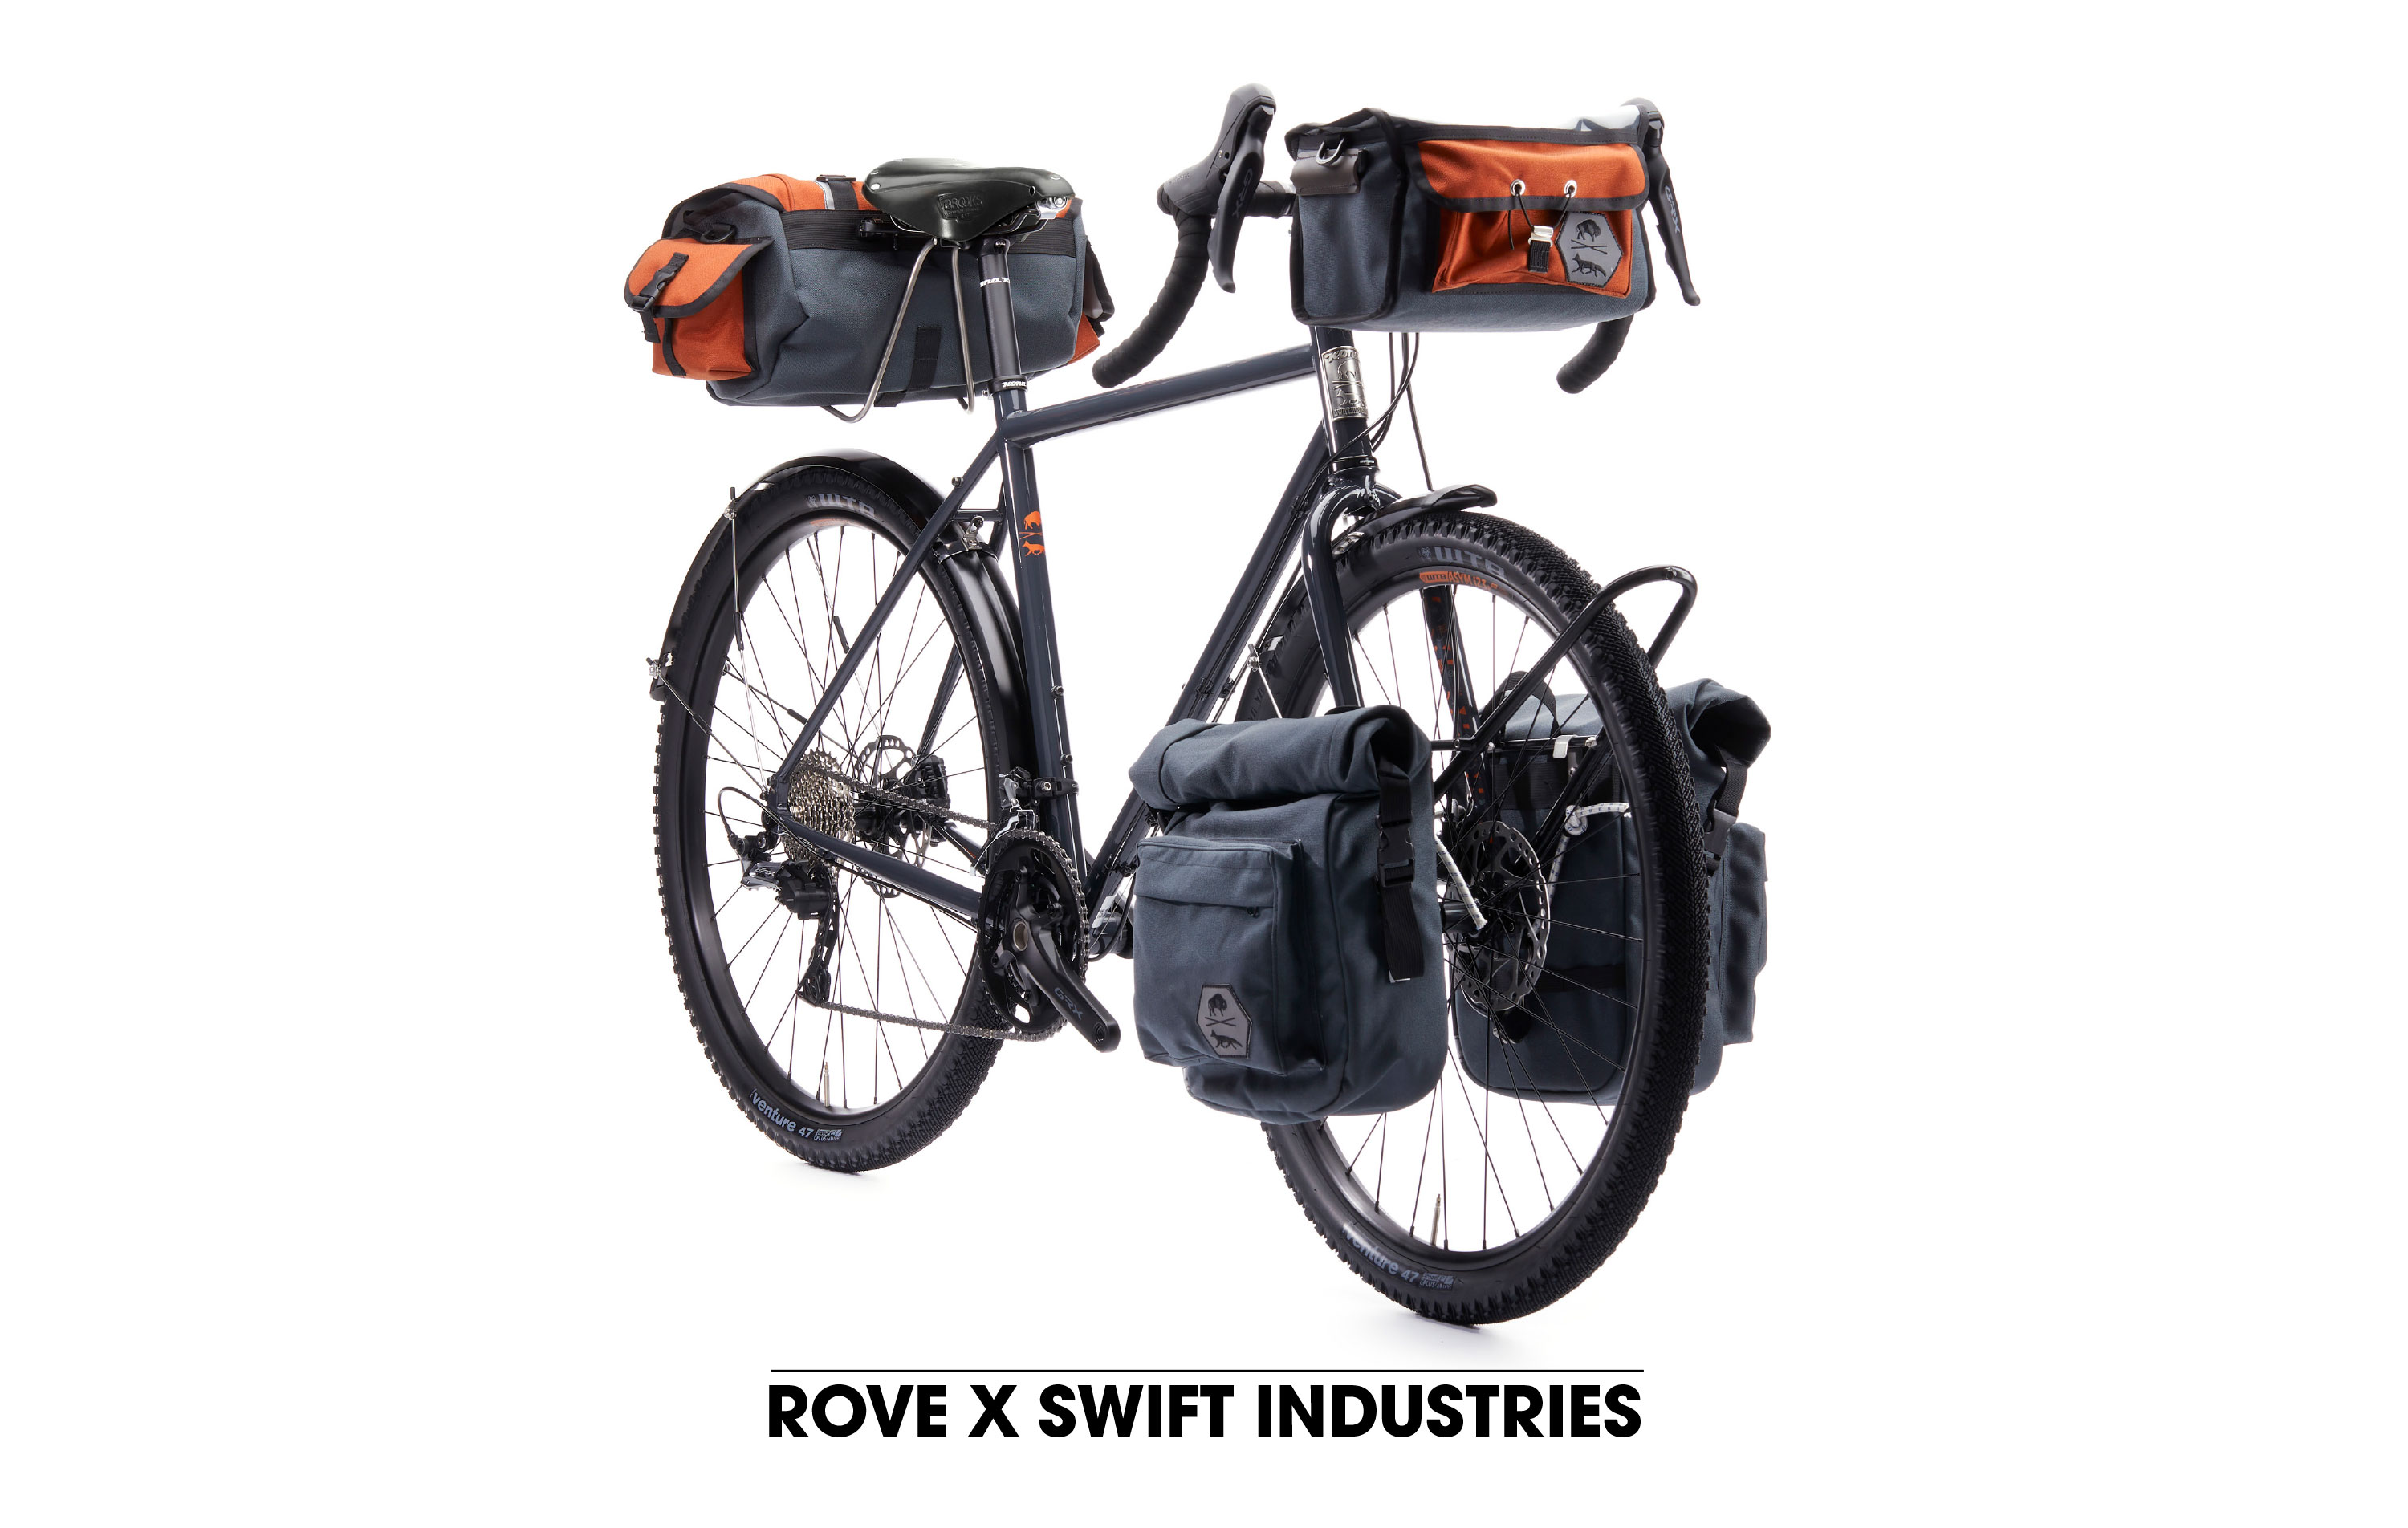 Introducing the Swift Rove, a Limited Edition Kona X Swift